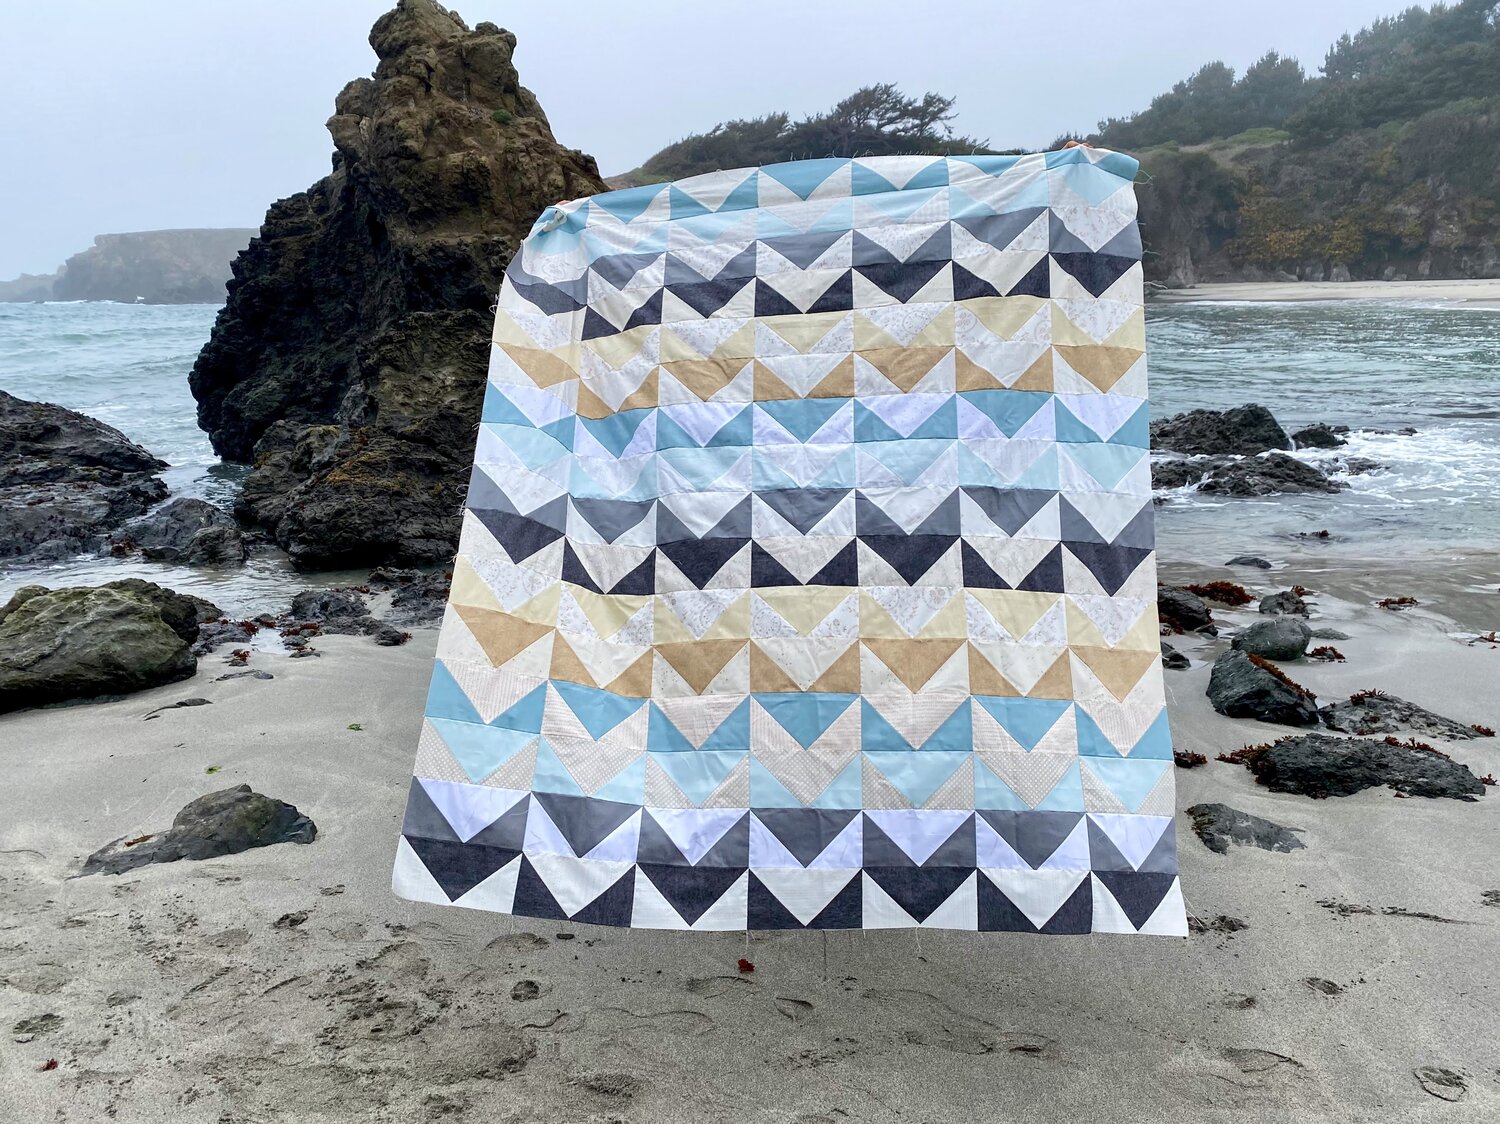 Elizabeth was one of the first to complete her tester quilt and when I saw this photo it just made me feel so proud and excited! She did such a beautiful job and this beach photo is absolutely amazing! Elizabeth shares her work on IG @sew.orcutt.